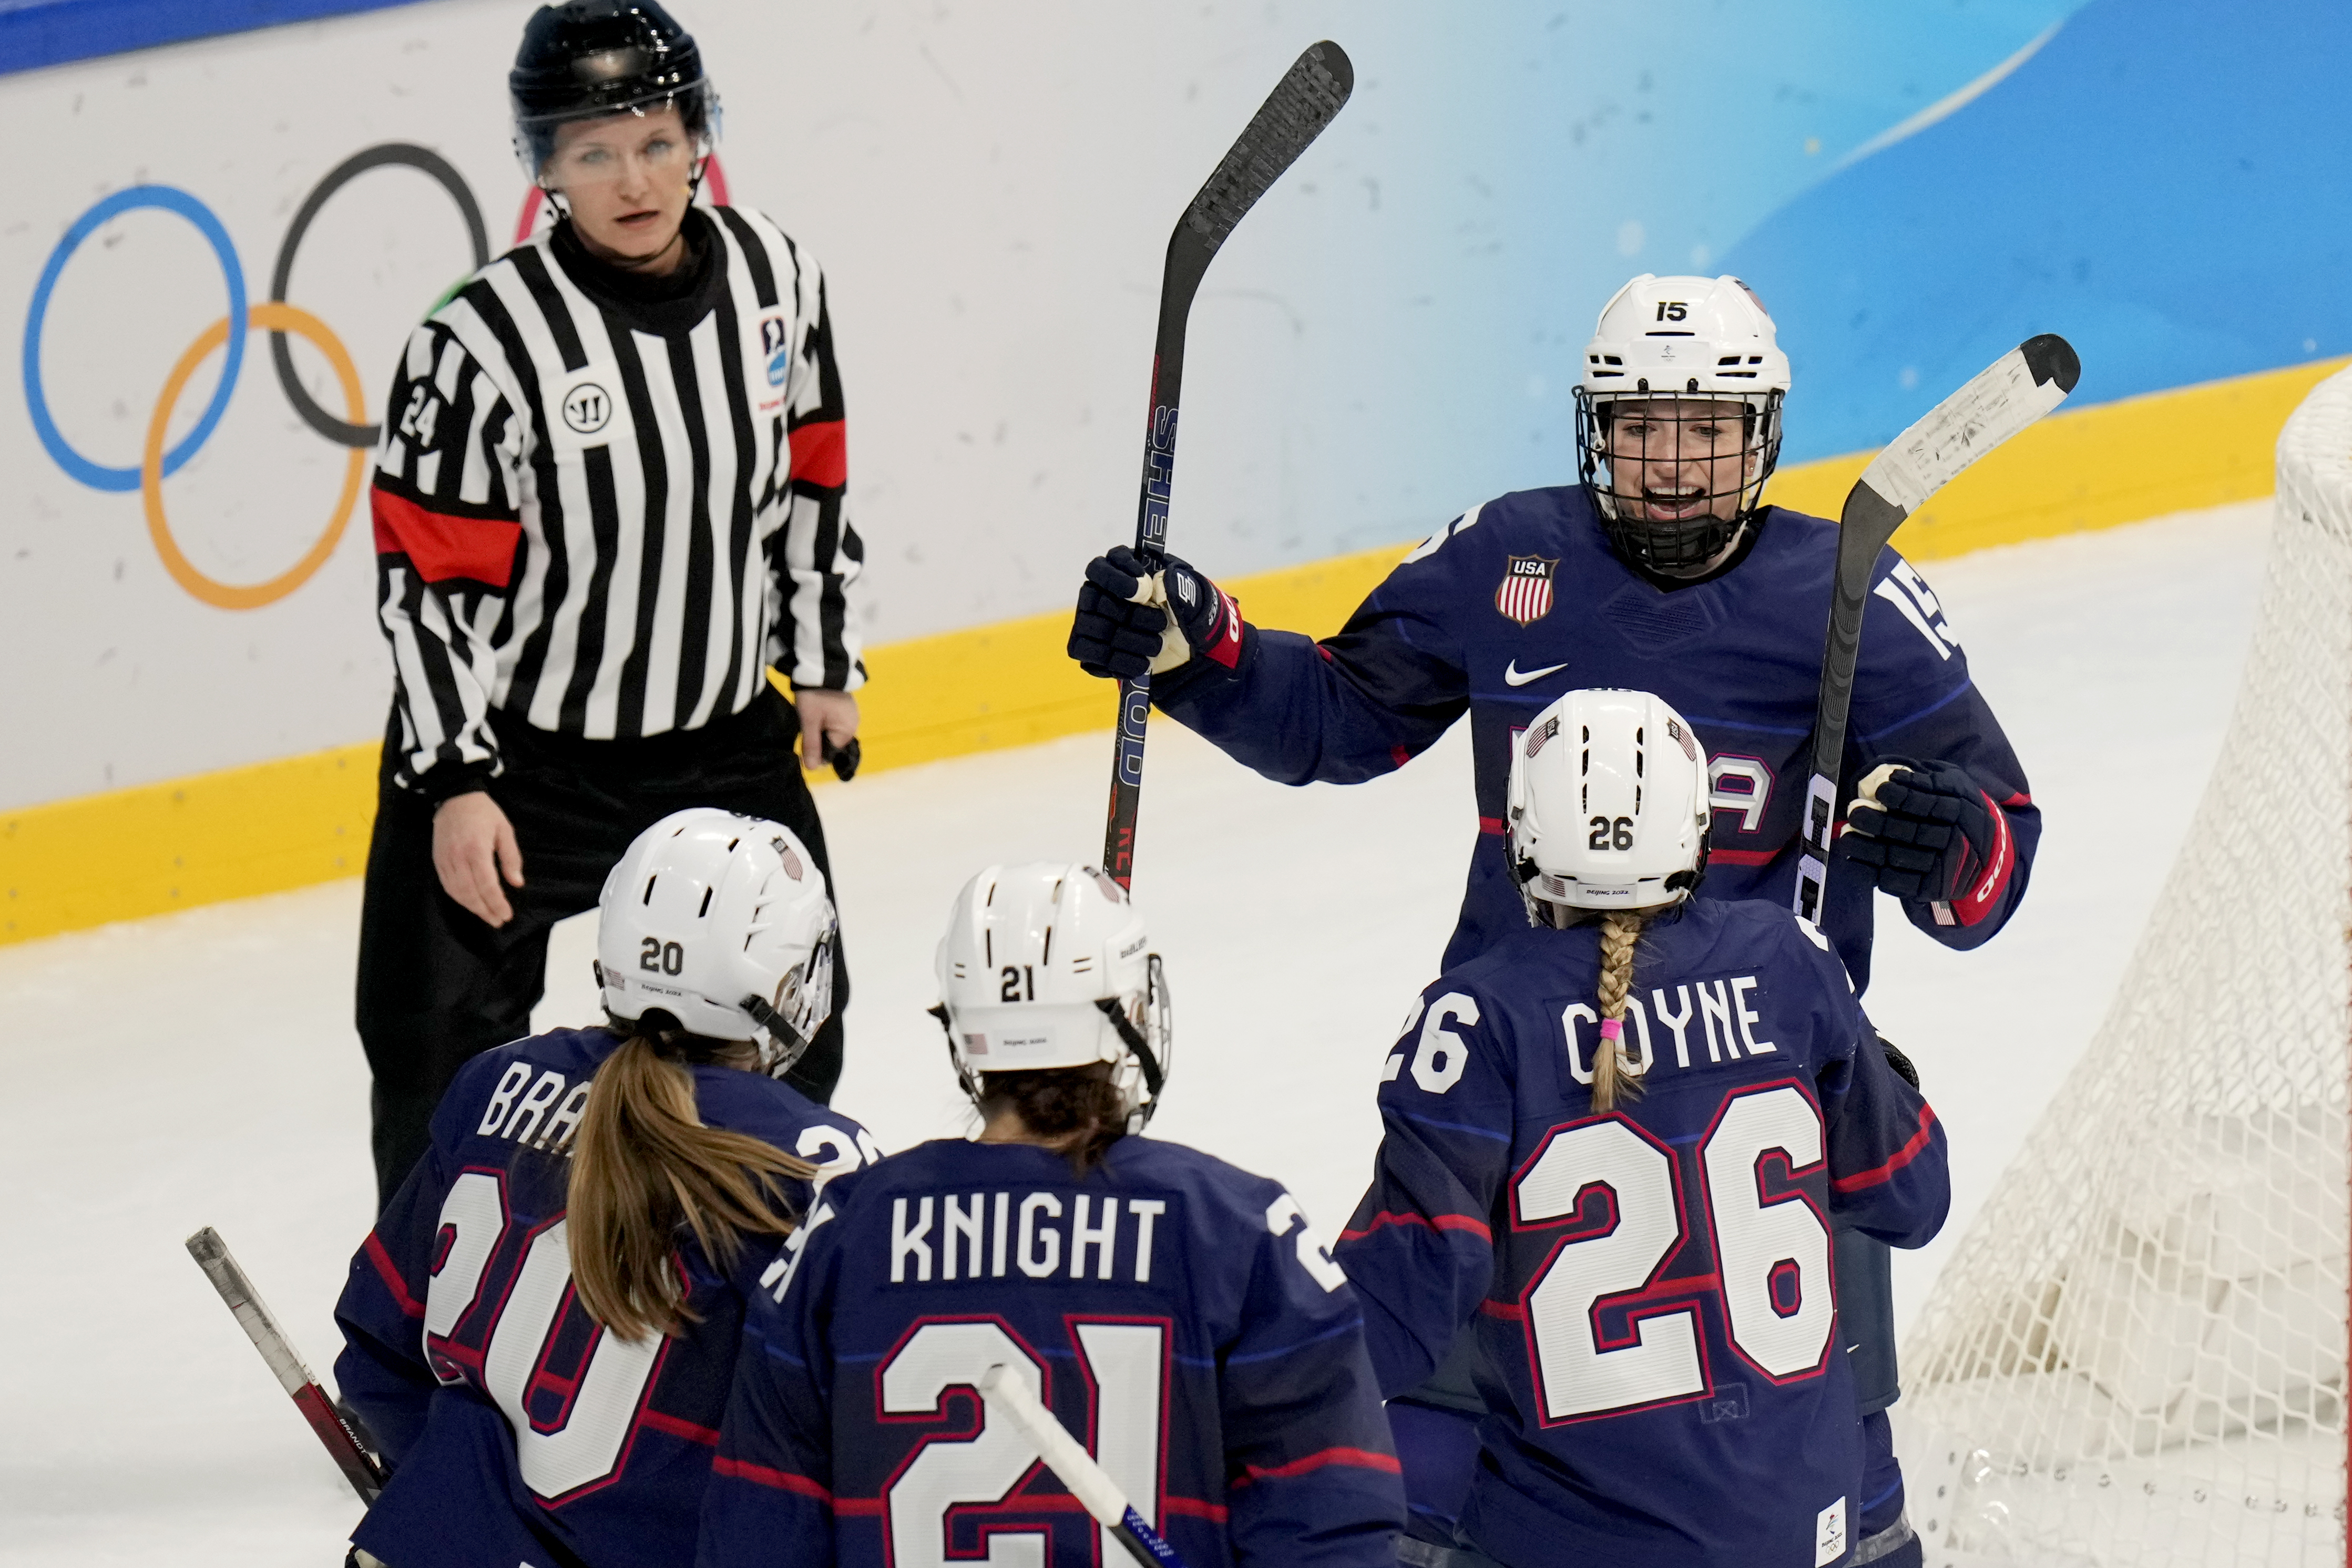 Canada Wins Fourth Straight Olympic Gold in Women's Hockey